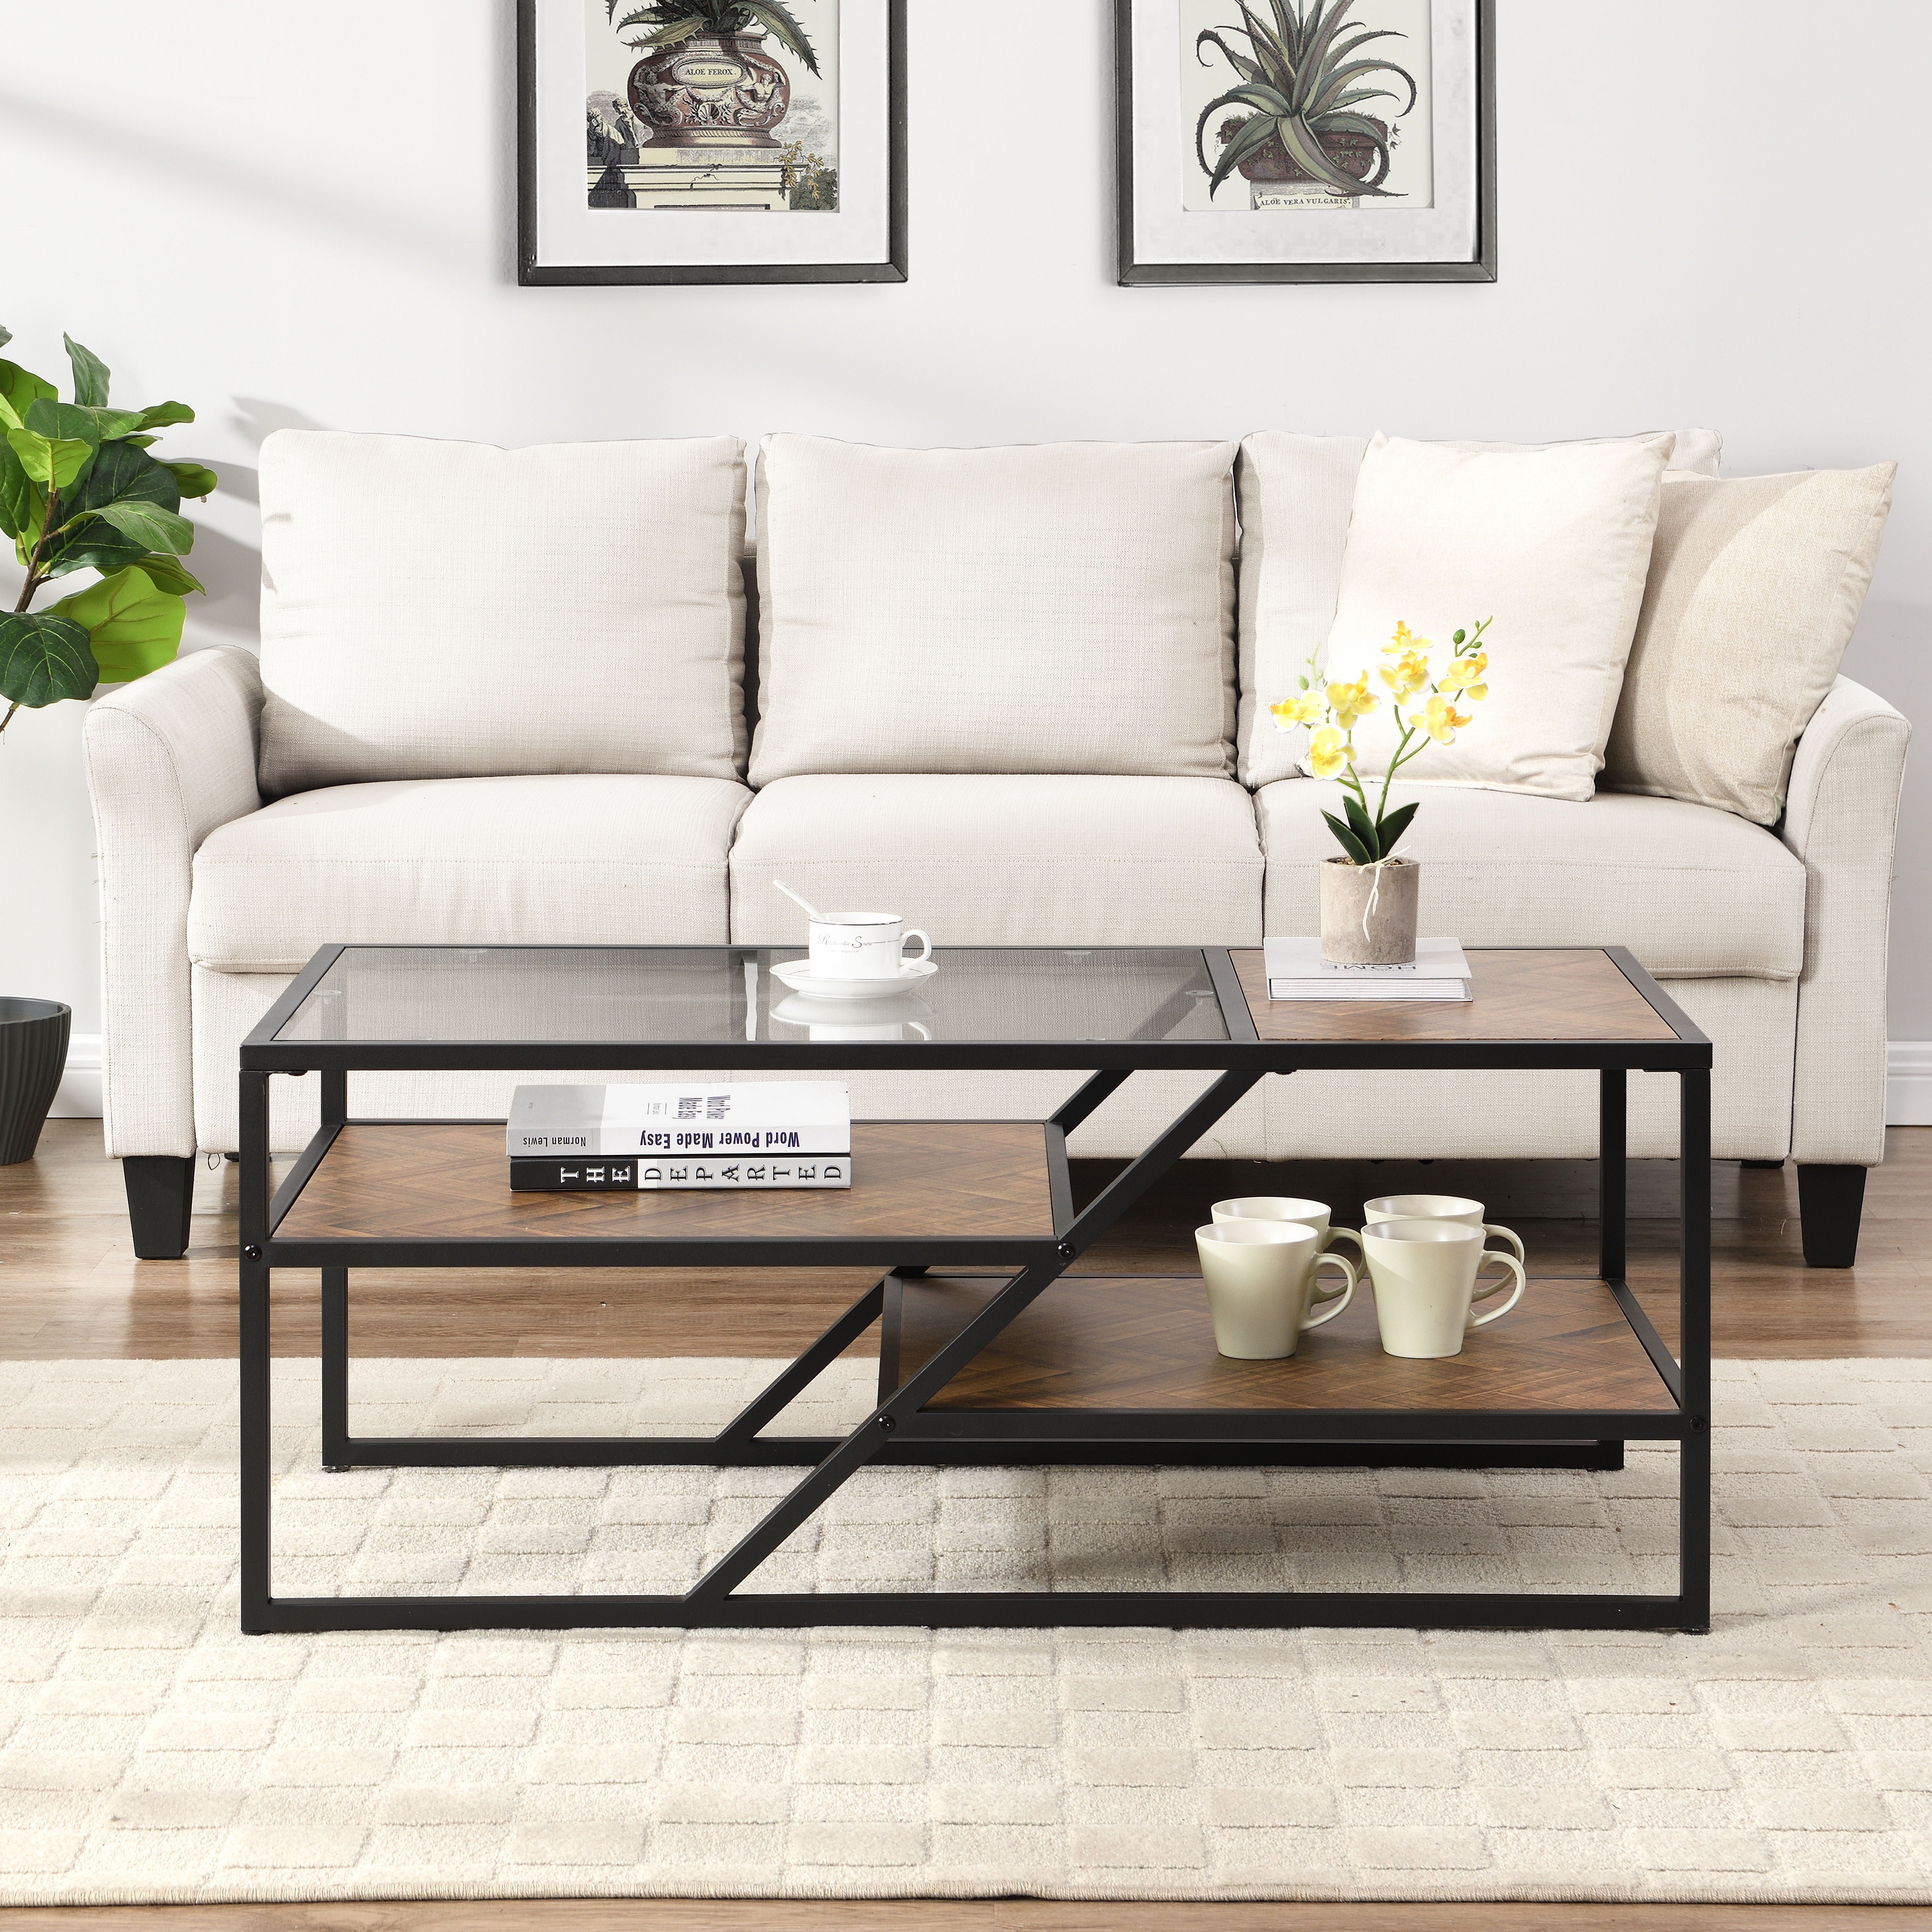 Black Coffee Table With Storage Shelf, Tempered Glass Coffee Table With Metal Frame For Living Room & Bedroom